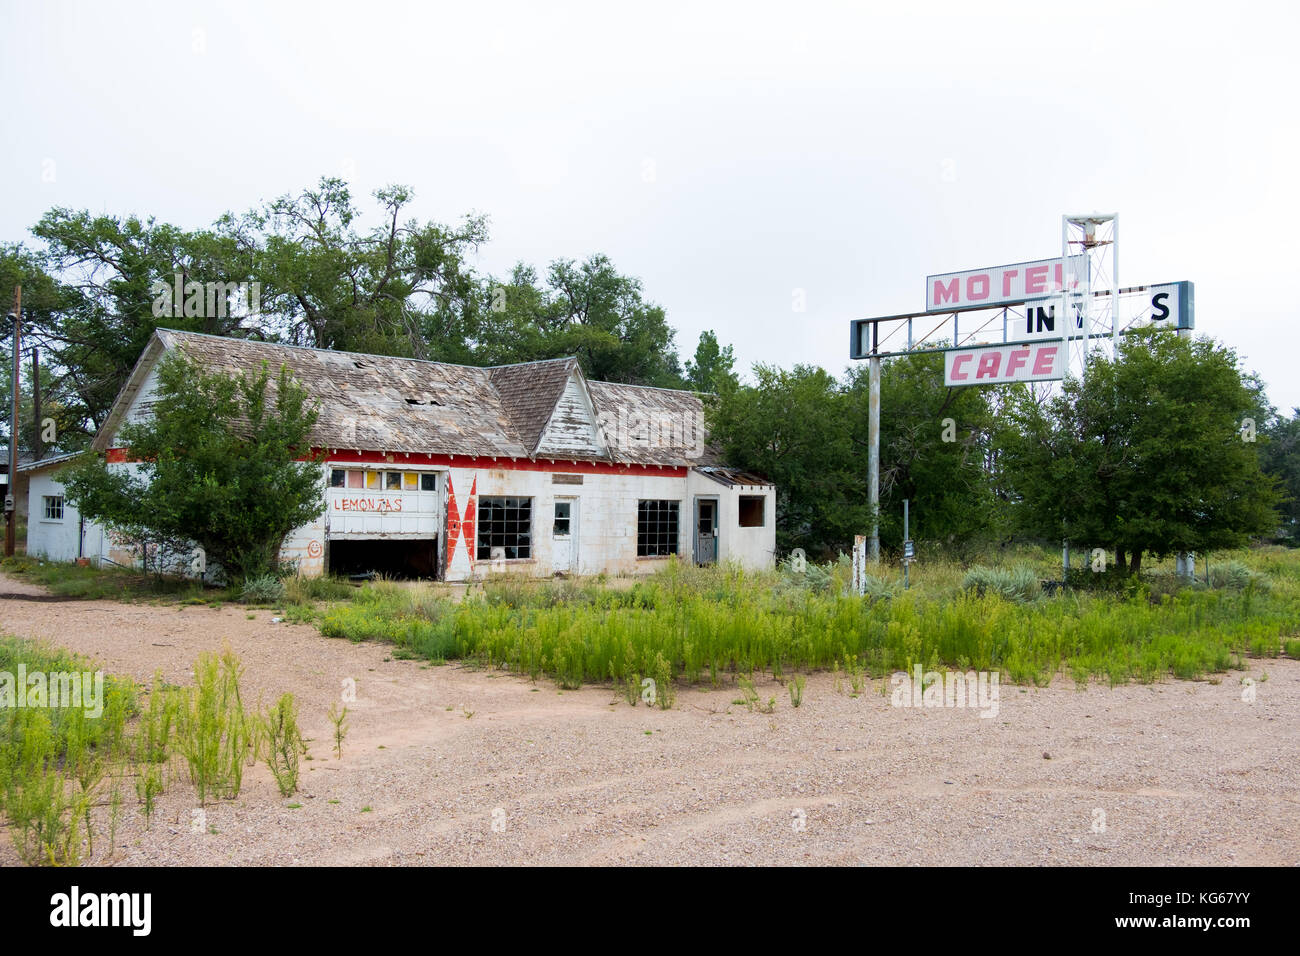 The forgotten town of Glenrio, Texas and Glenrio, New Mexico, split down the middle by the state border on Route 66. Stock Photo